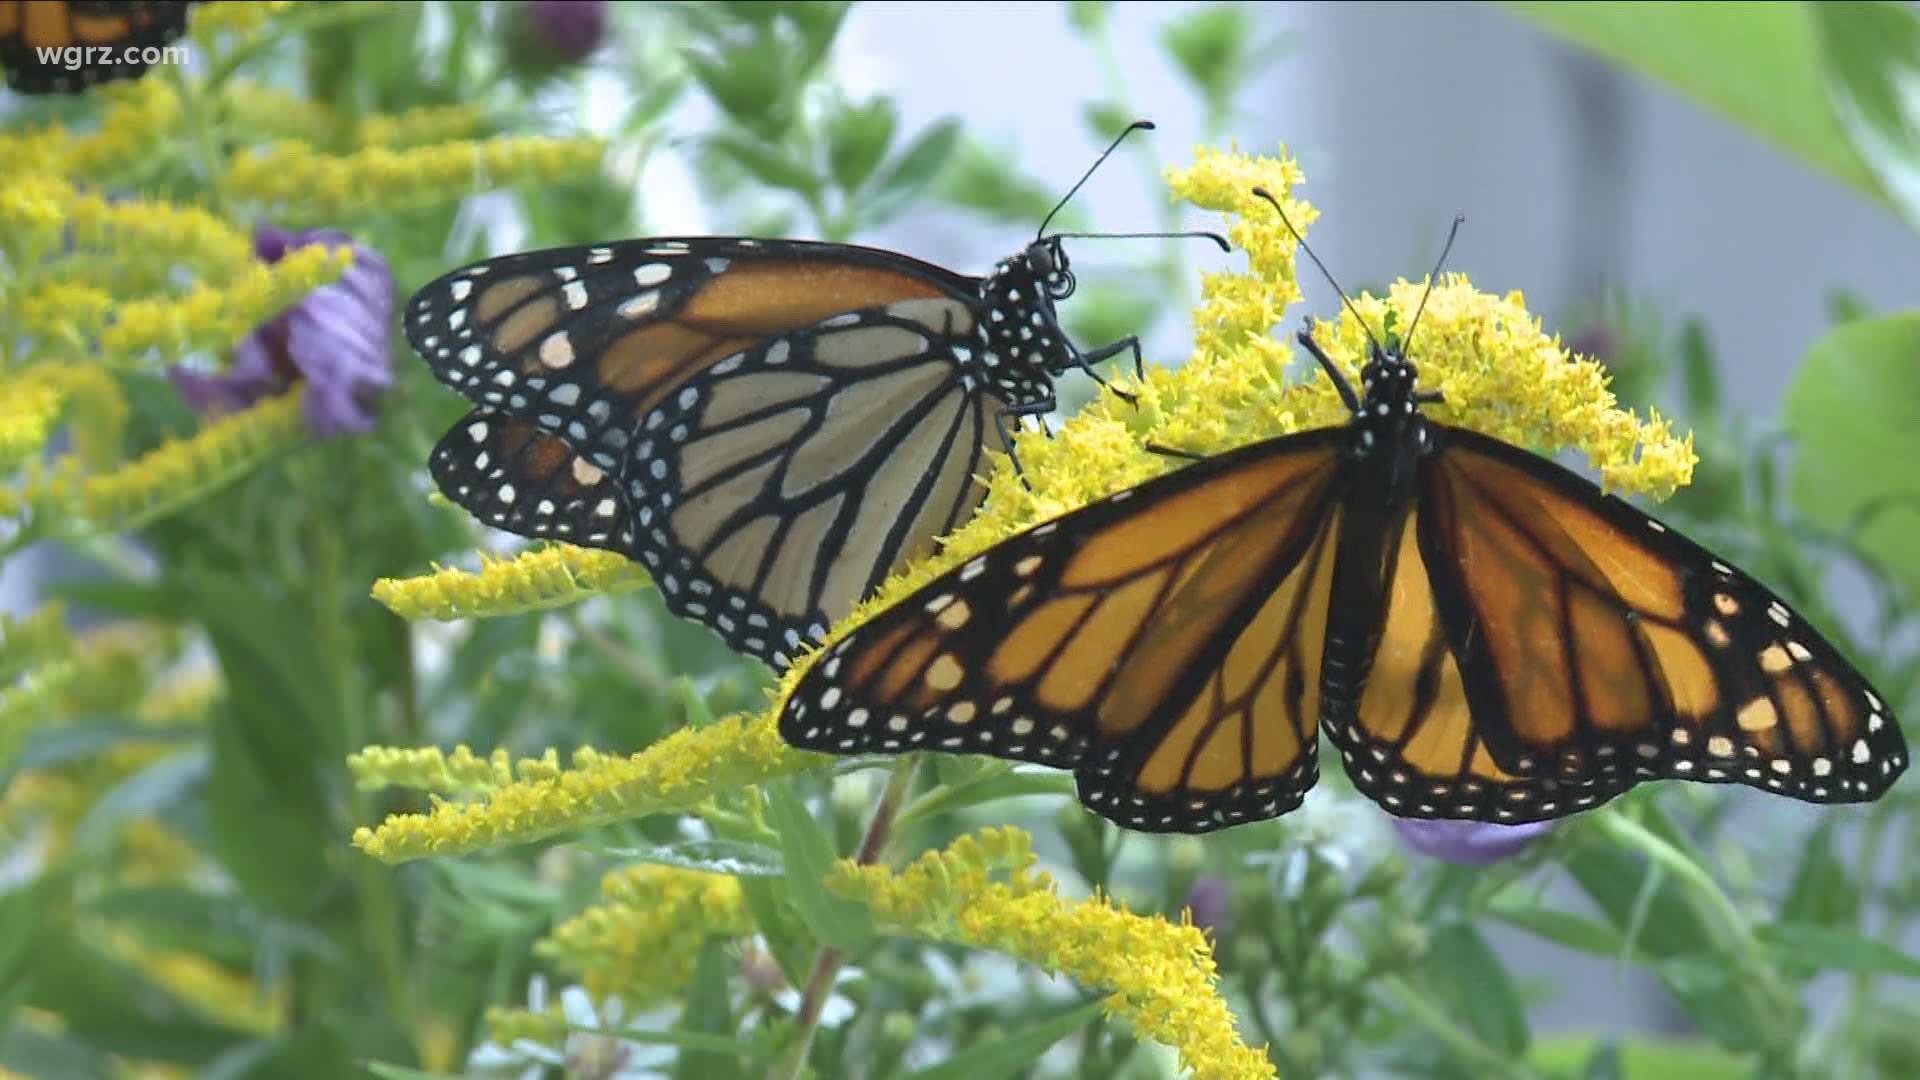 Terry Belke takes us 2 The Outdoors to learn about a creative new butterfly release program.